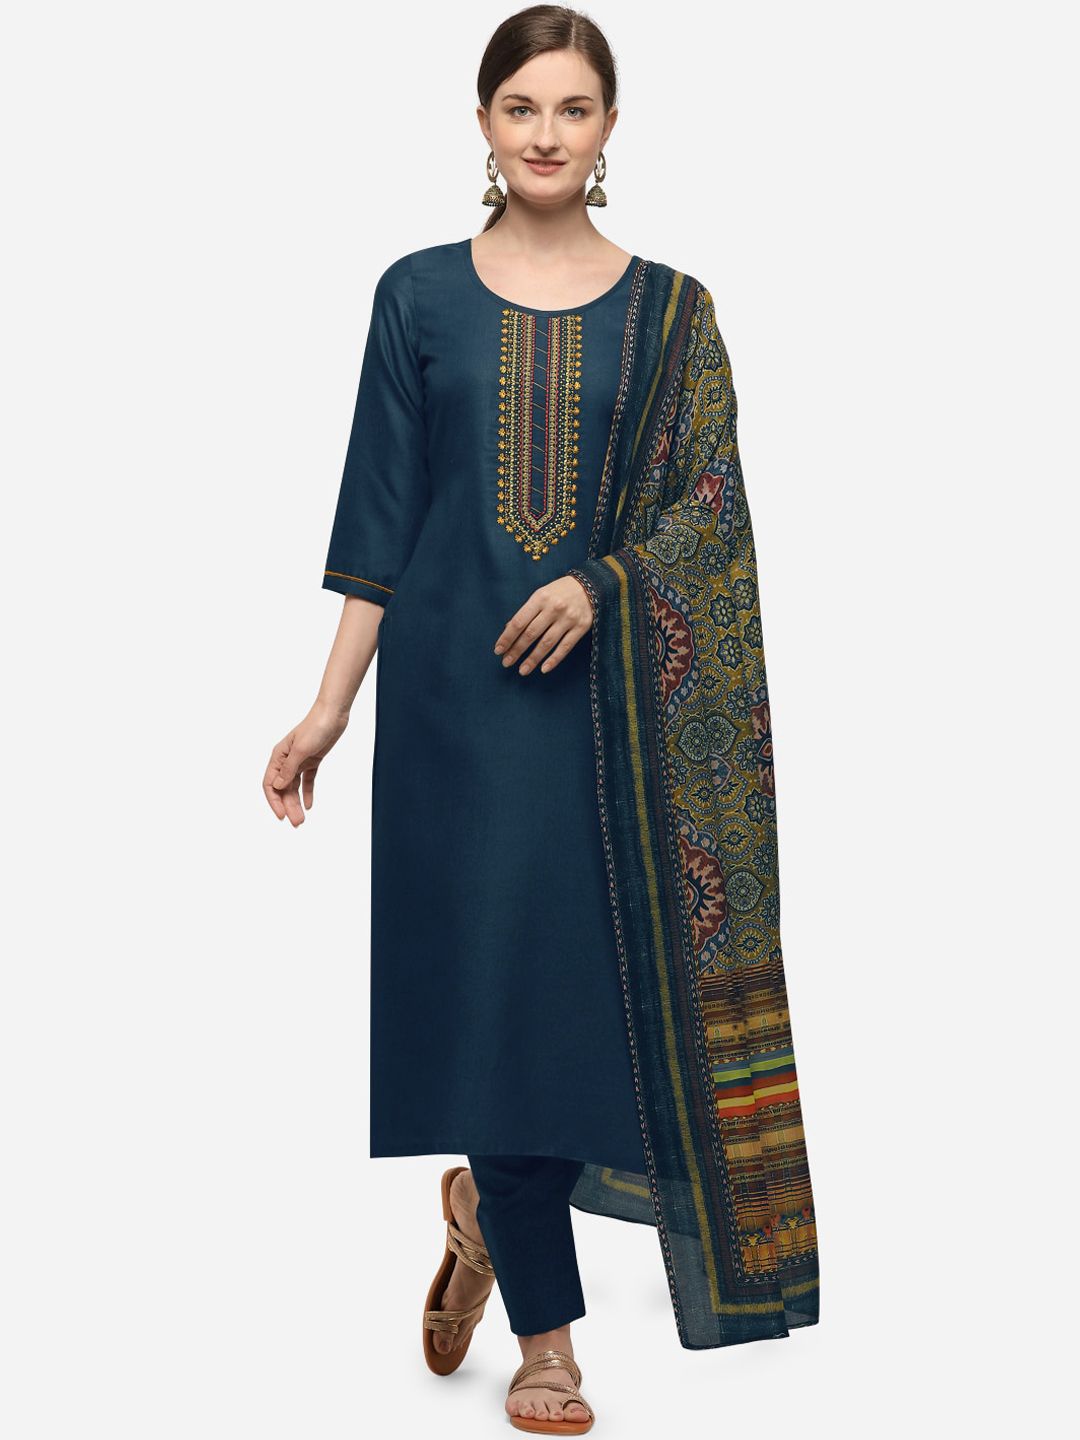 SheWill Navy Blue & Yellow Cotton Blend Unstitched Dress Material Price in India